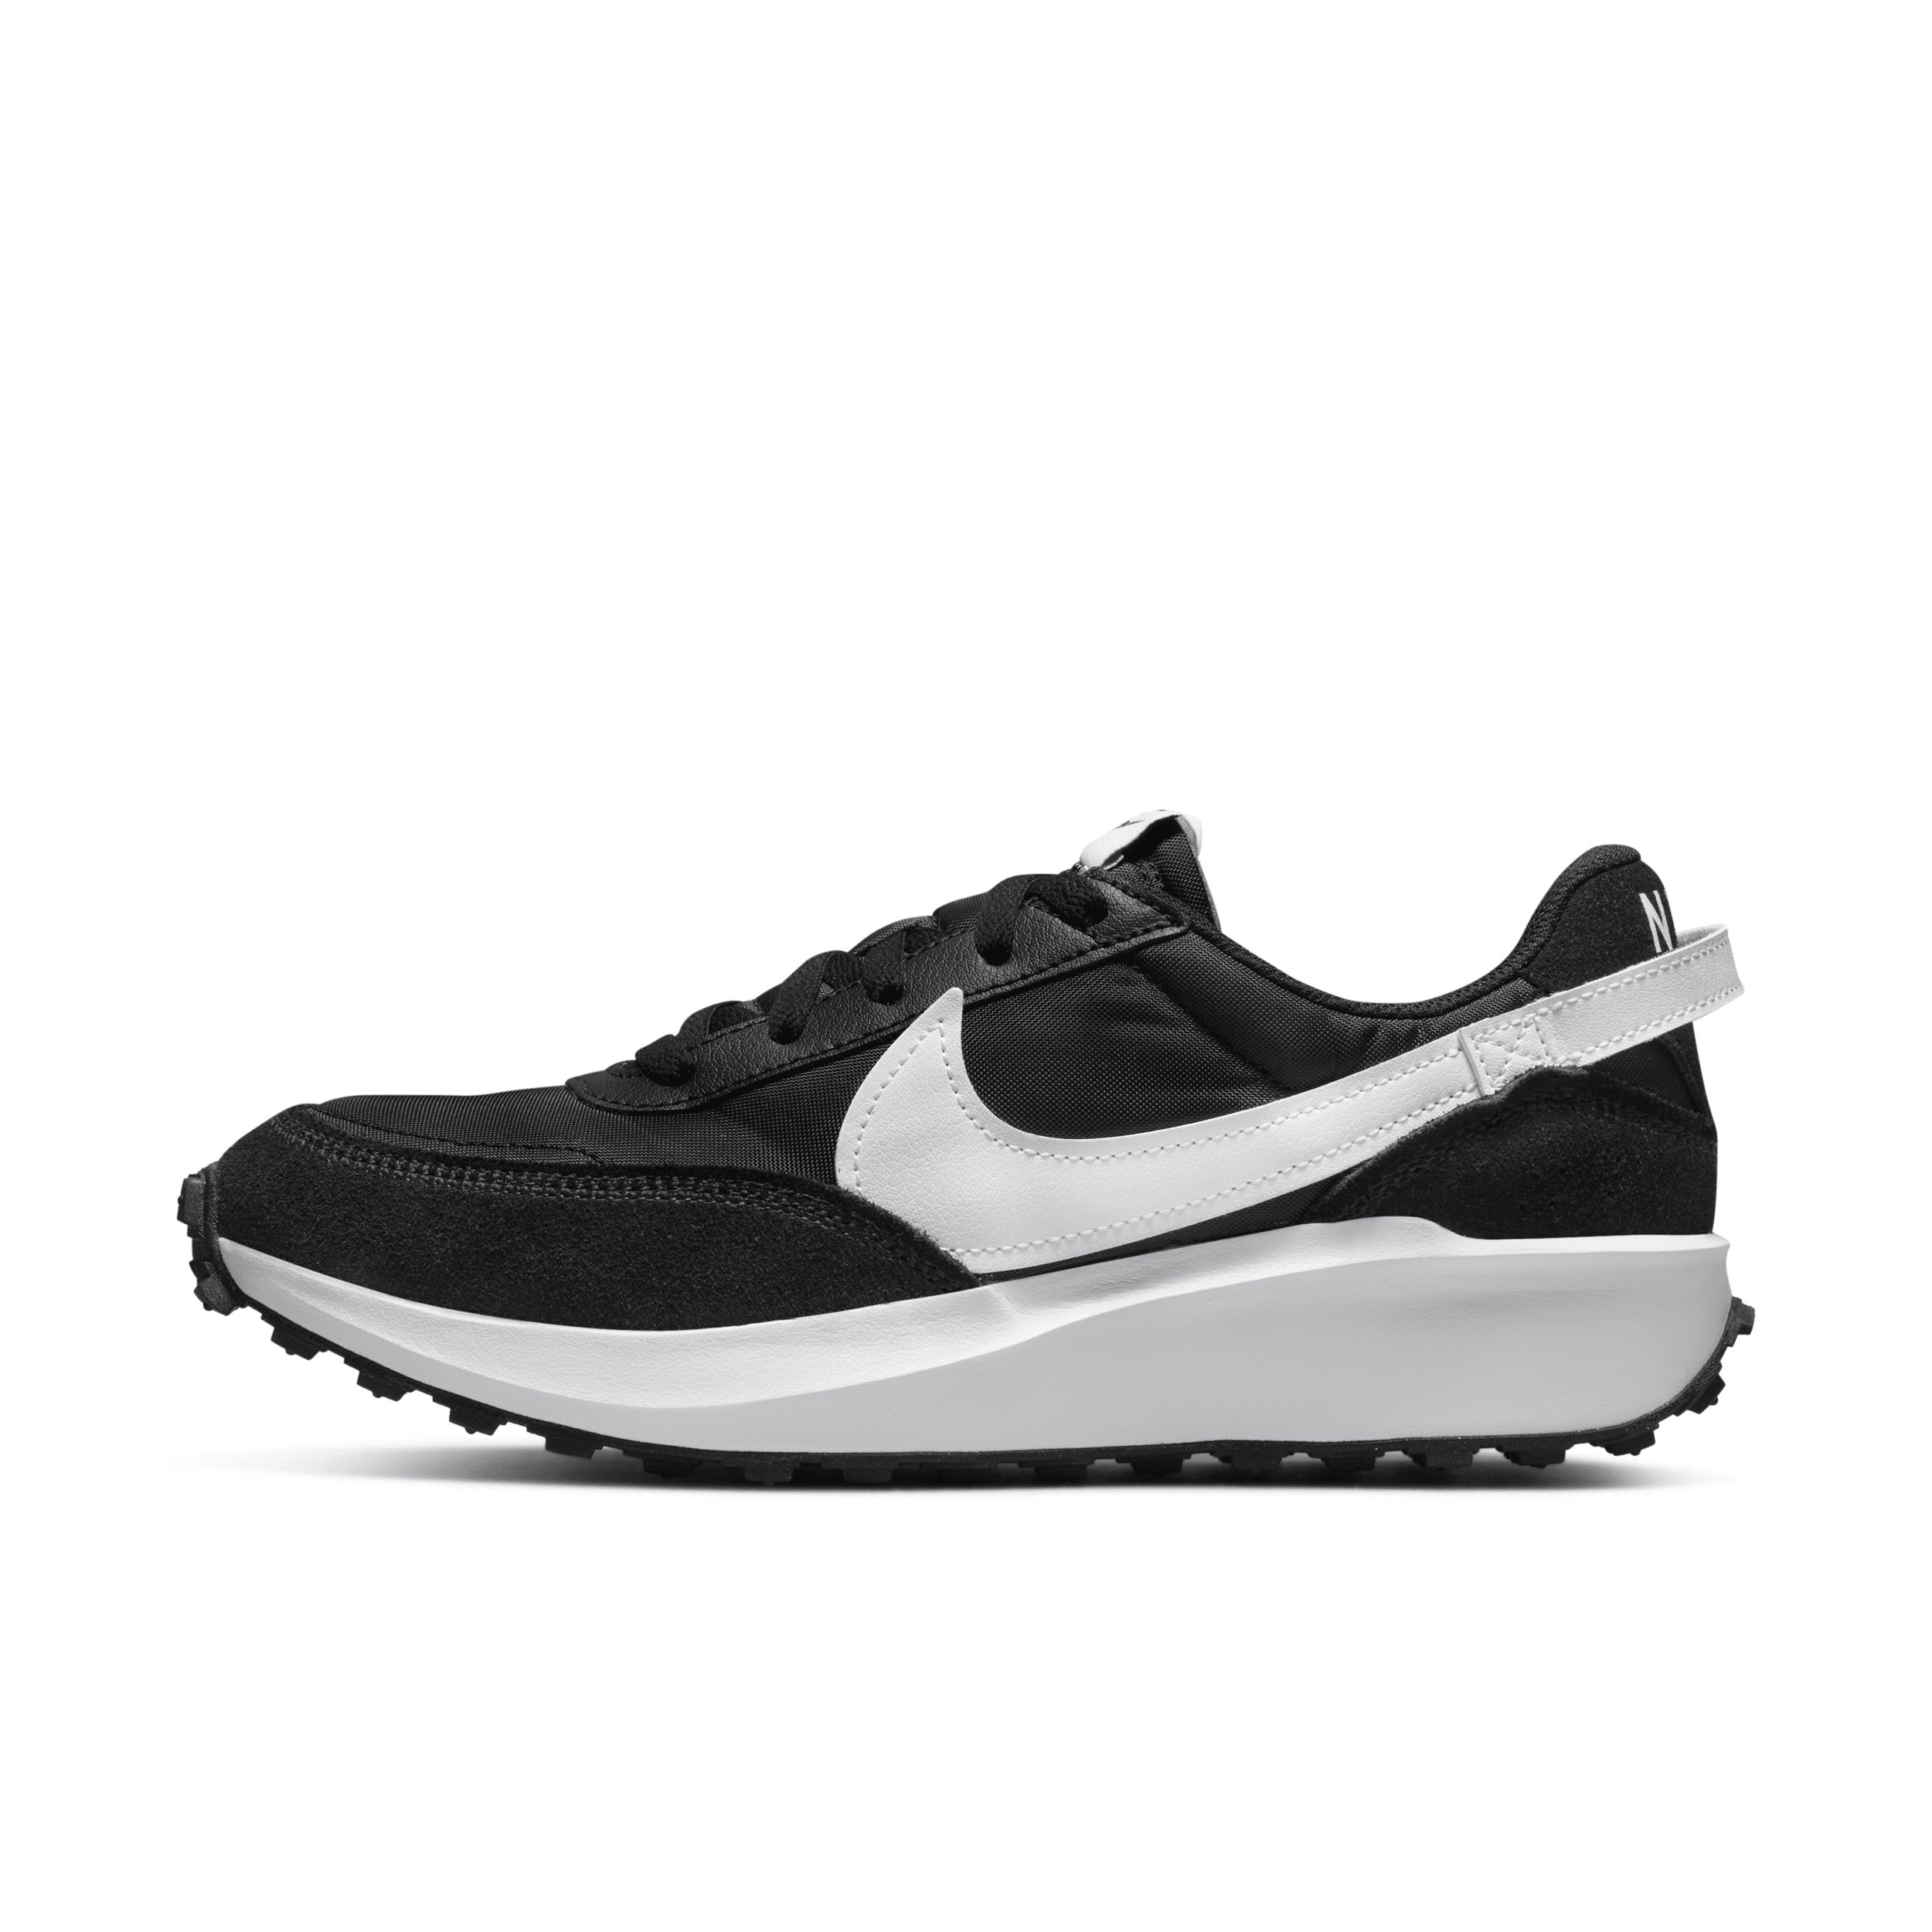 Nike Women's Waffle Debut Shoes in Black, Size: 9.5 | DH9523-002 | Nike (US)